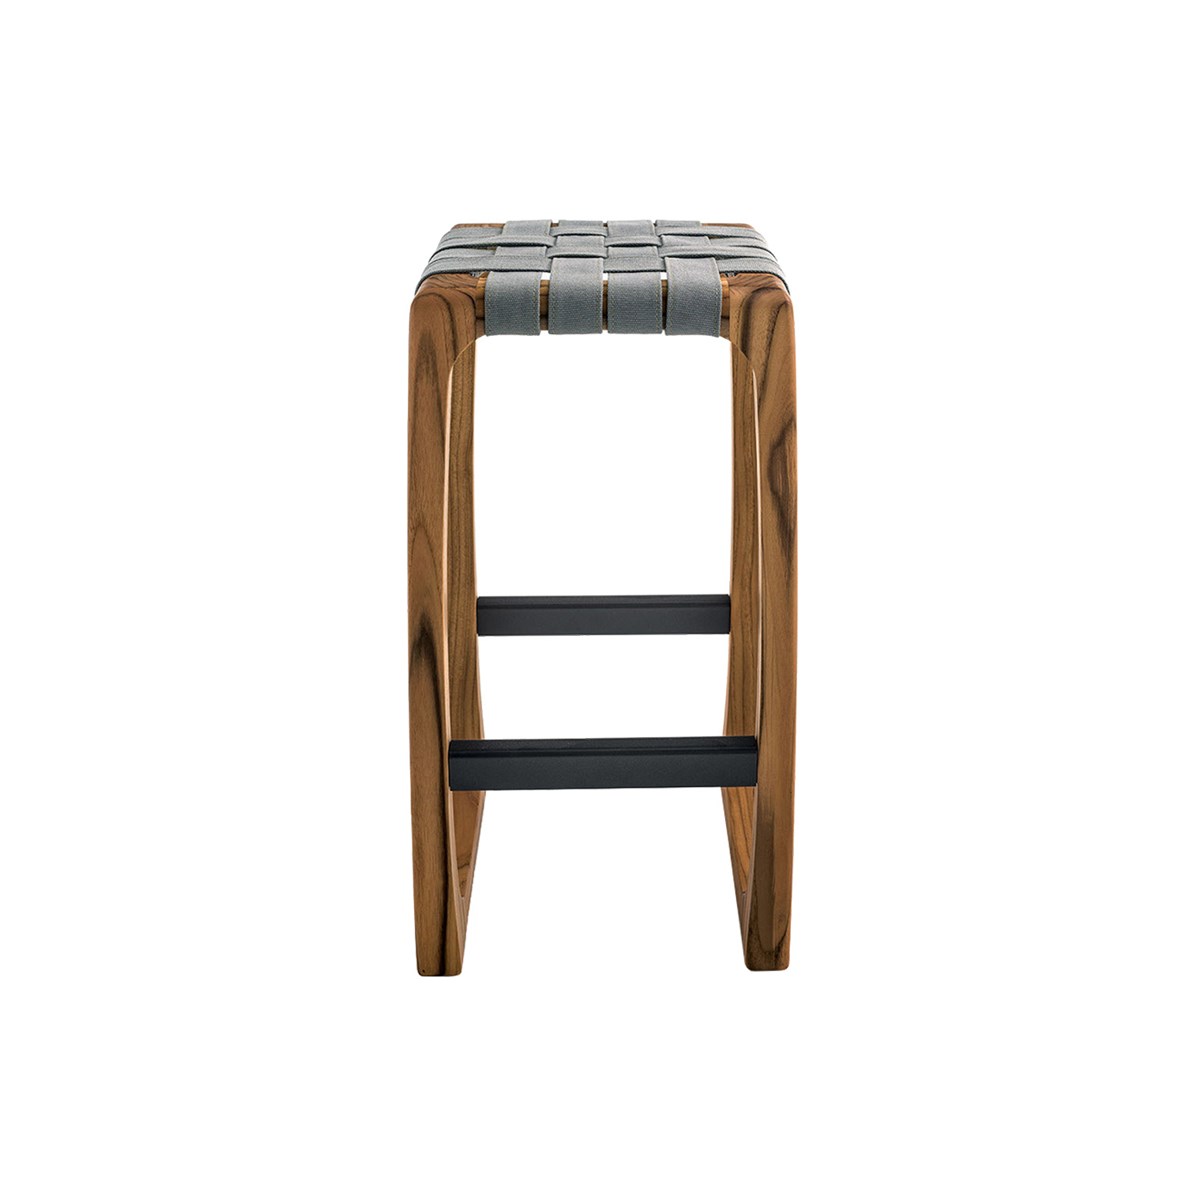 Riva-1920-Jamie-Durie-Bungalow-Outdoor-Stool-Collection-Matisse-5